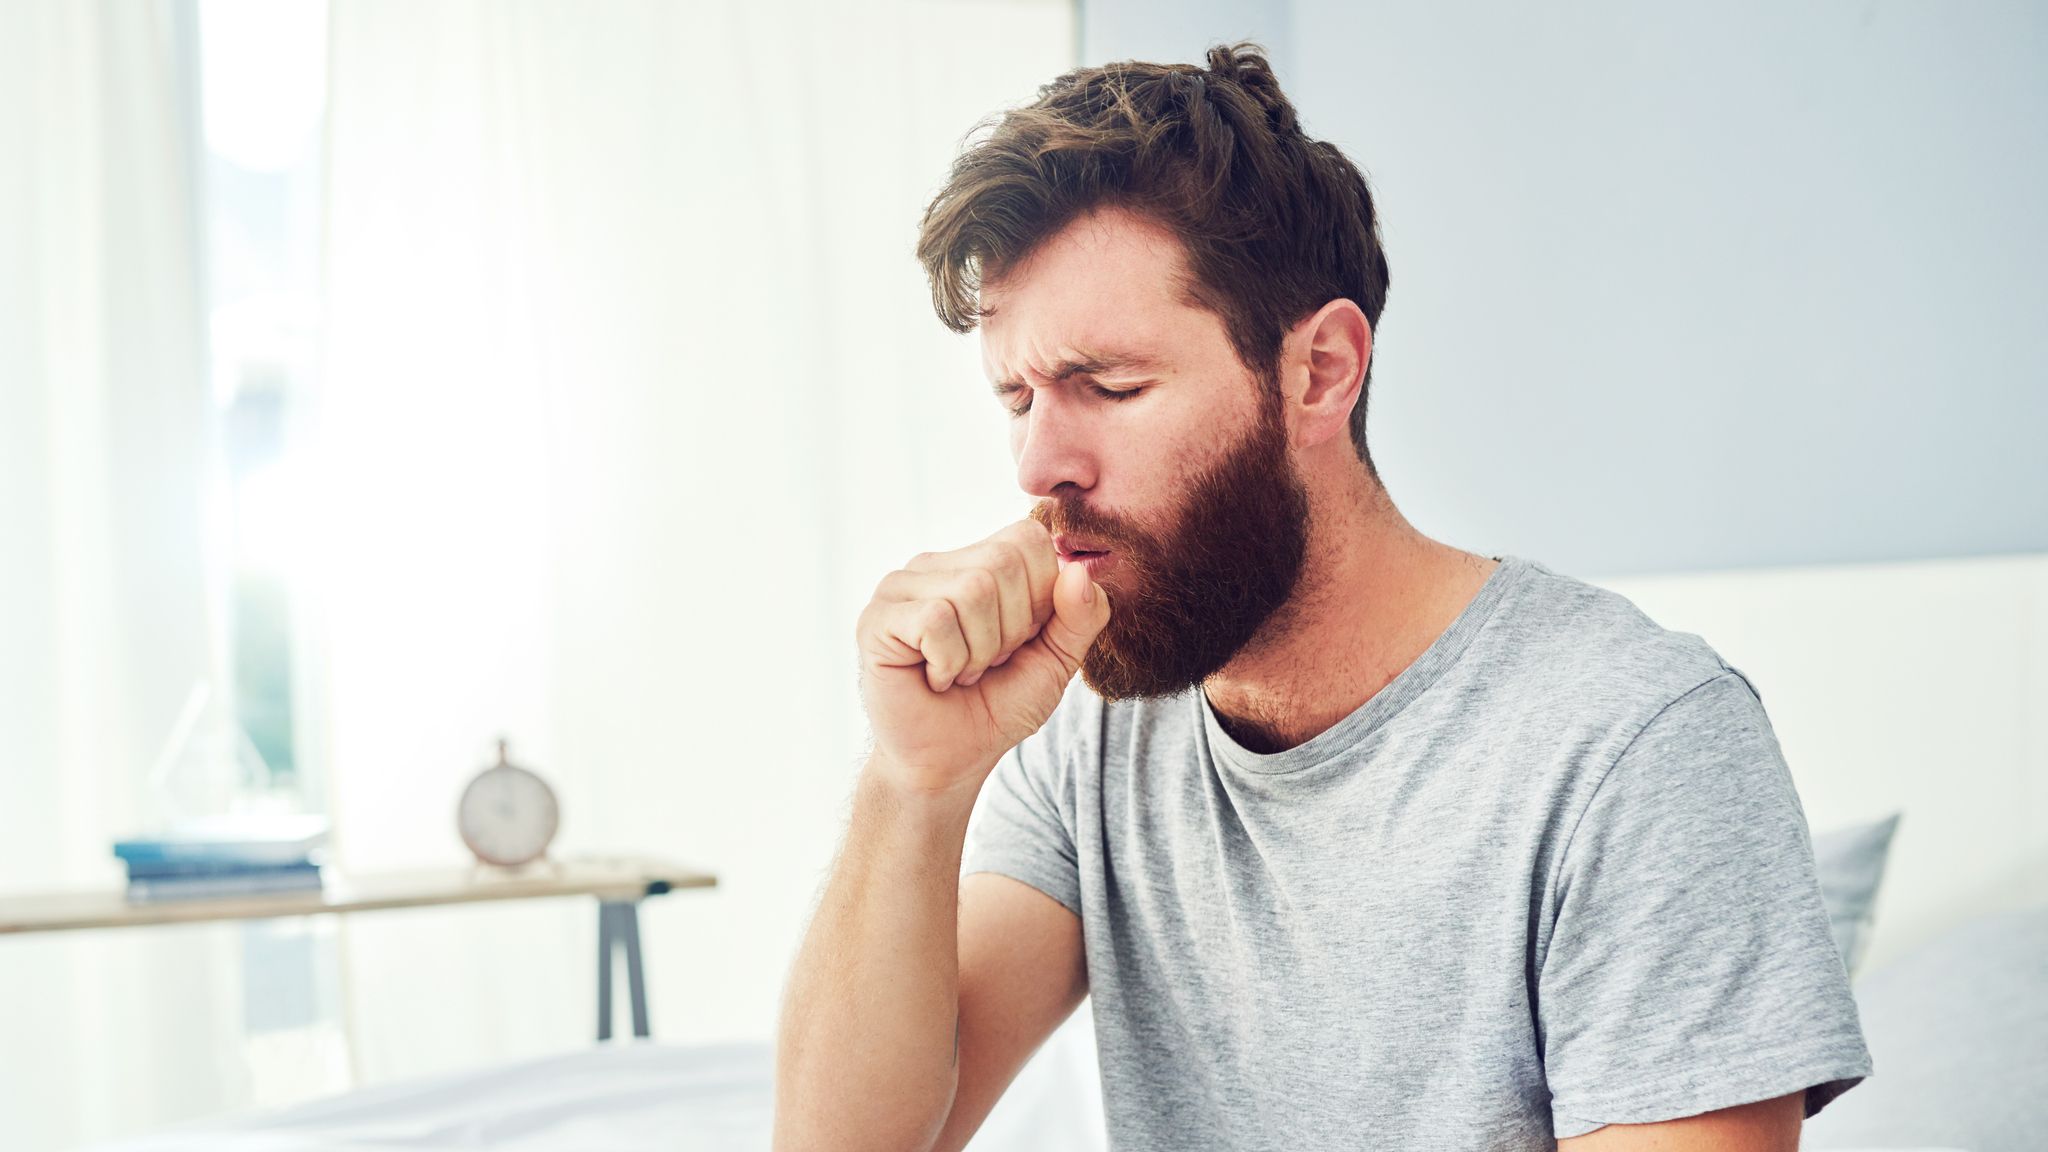 How to Get Rid of a Lingering Cough - Tips to Clear Lasting Cough